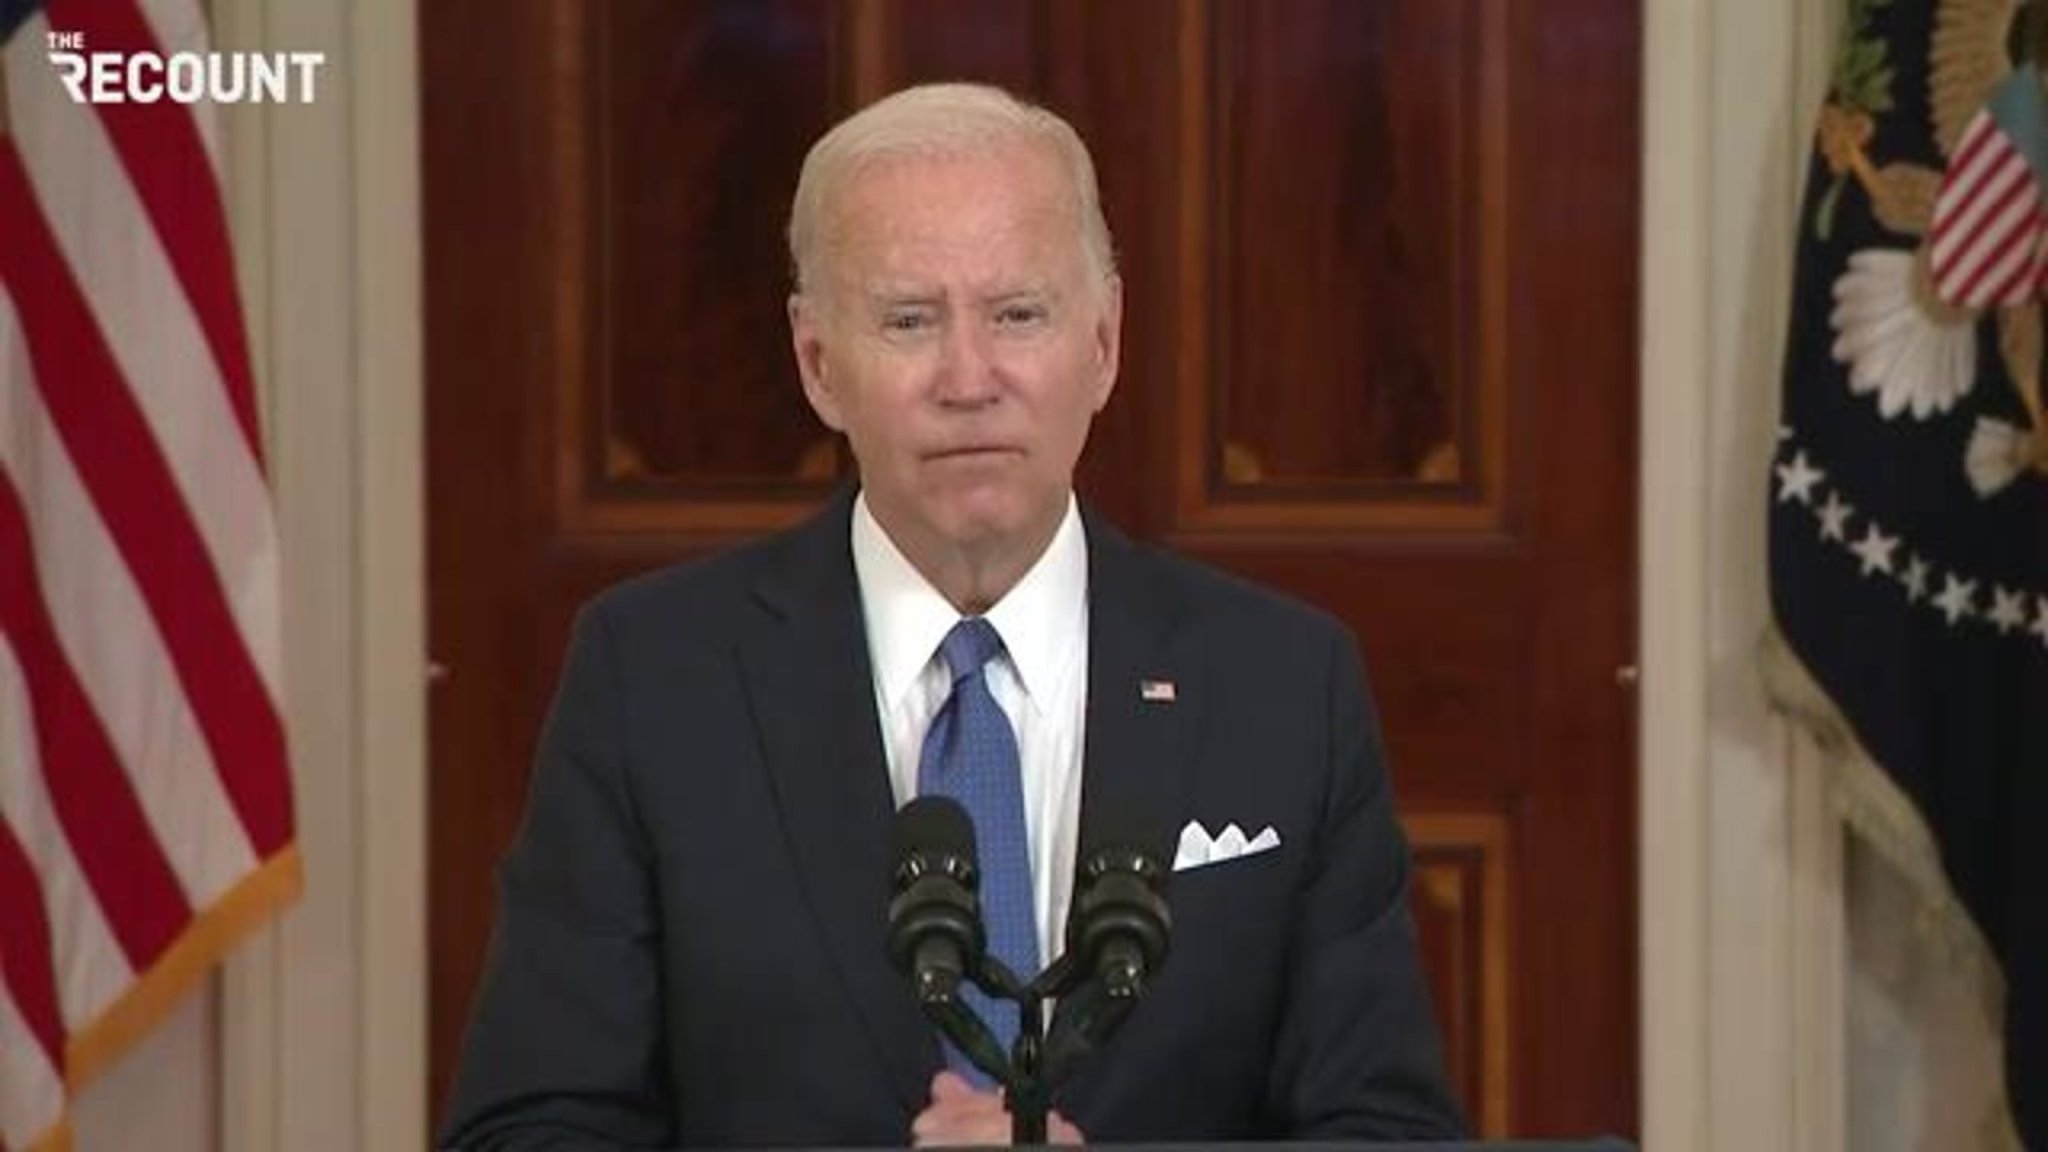 President Biden urges Americans to elect lawmakers in November who will codify Roe v. Wade into law.